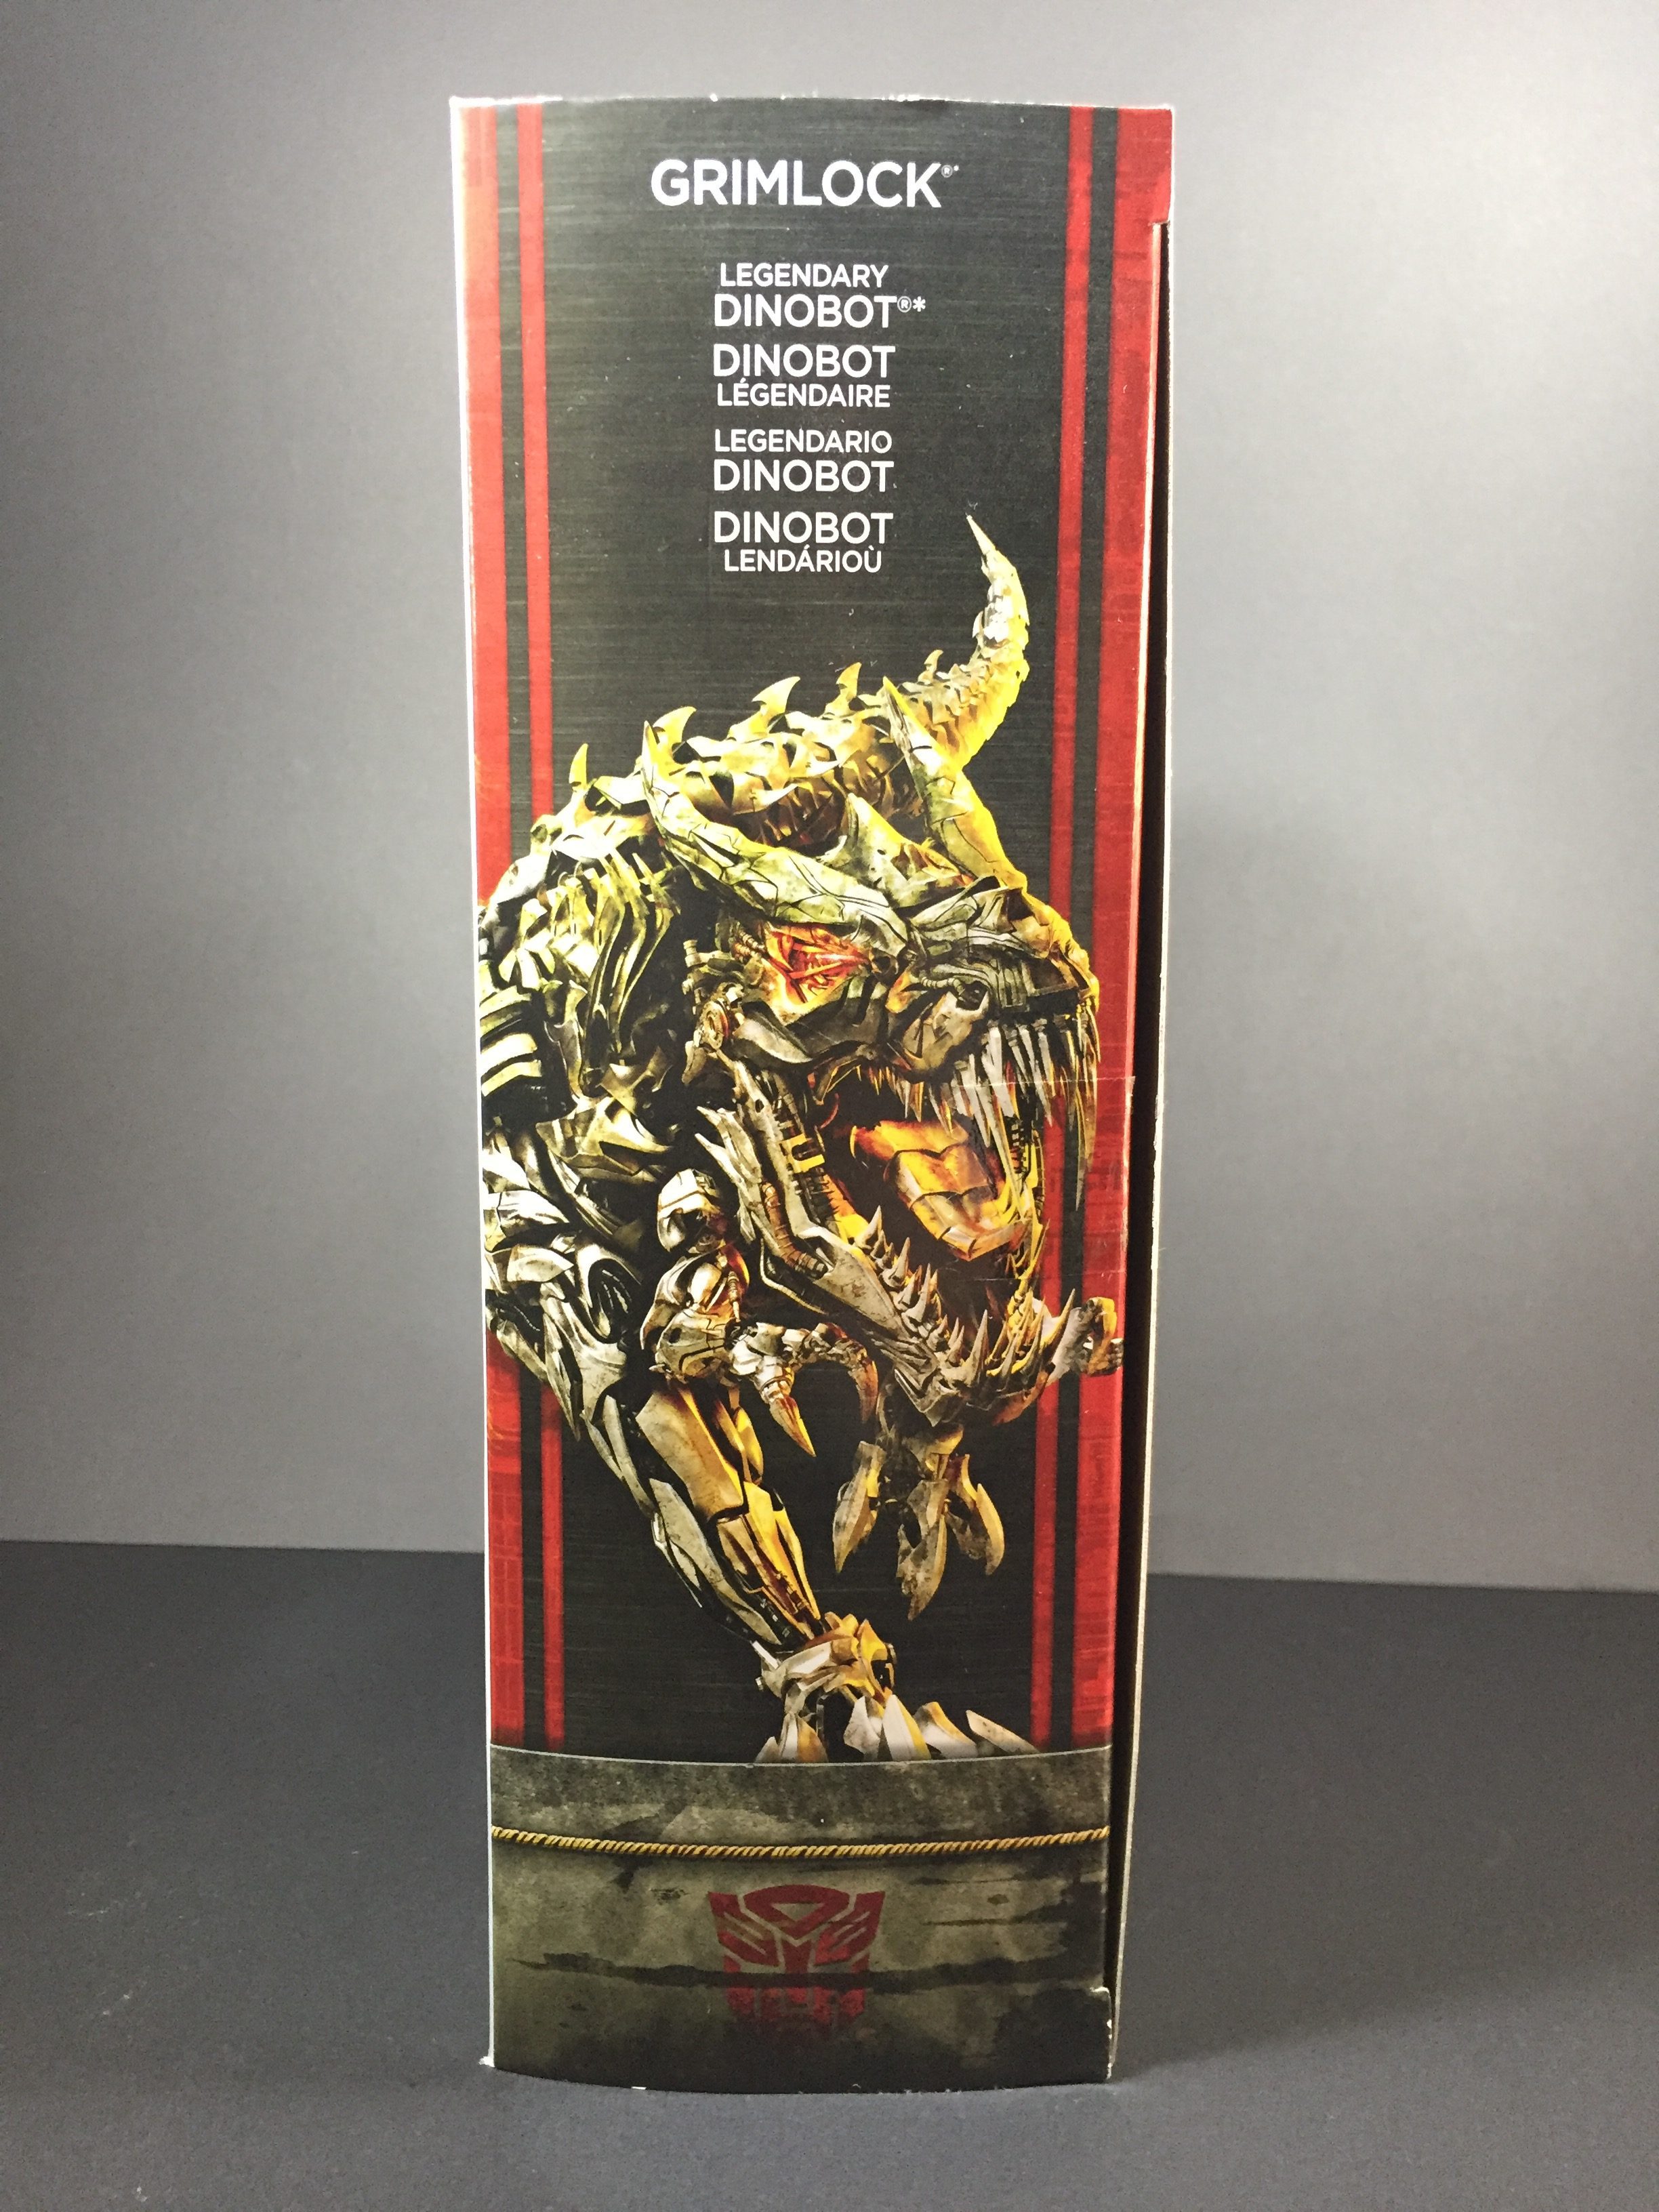 Packaging for Grimlock. (Transformers: The Last Knight)